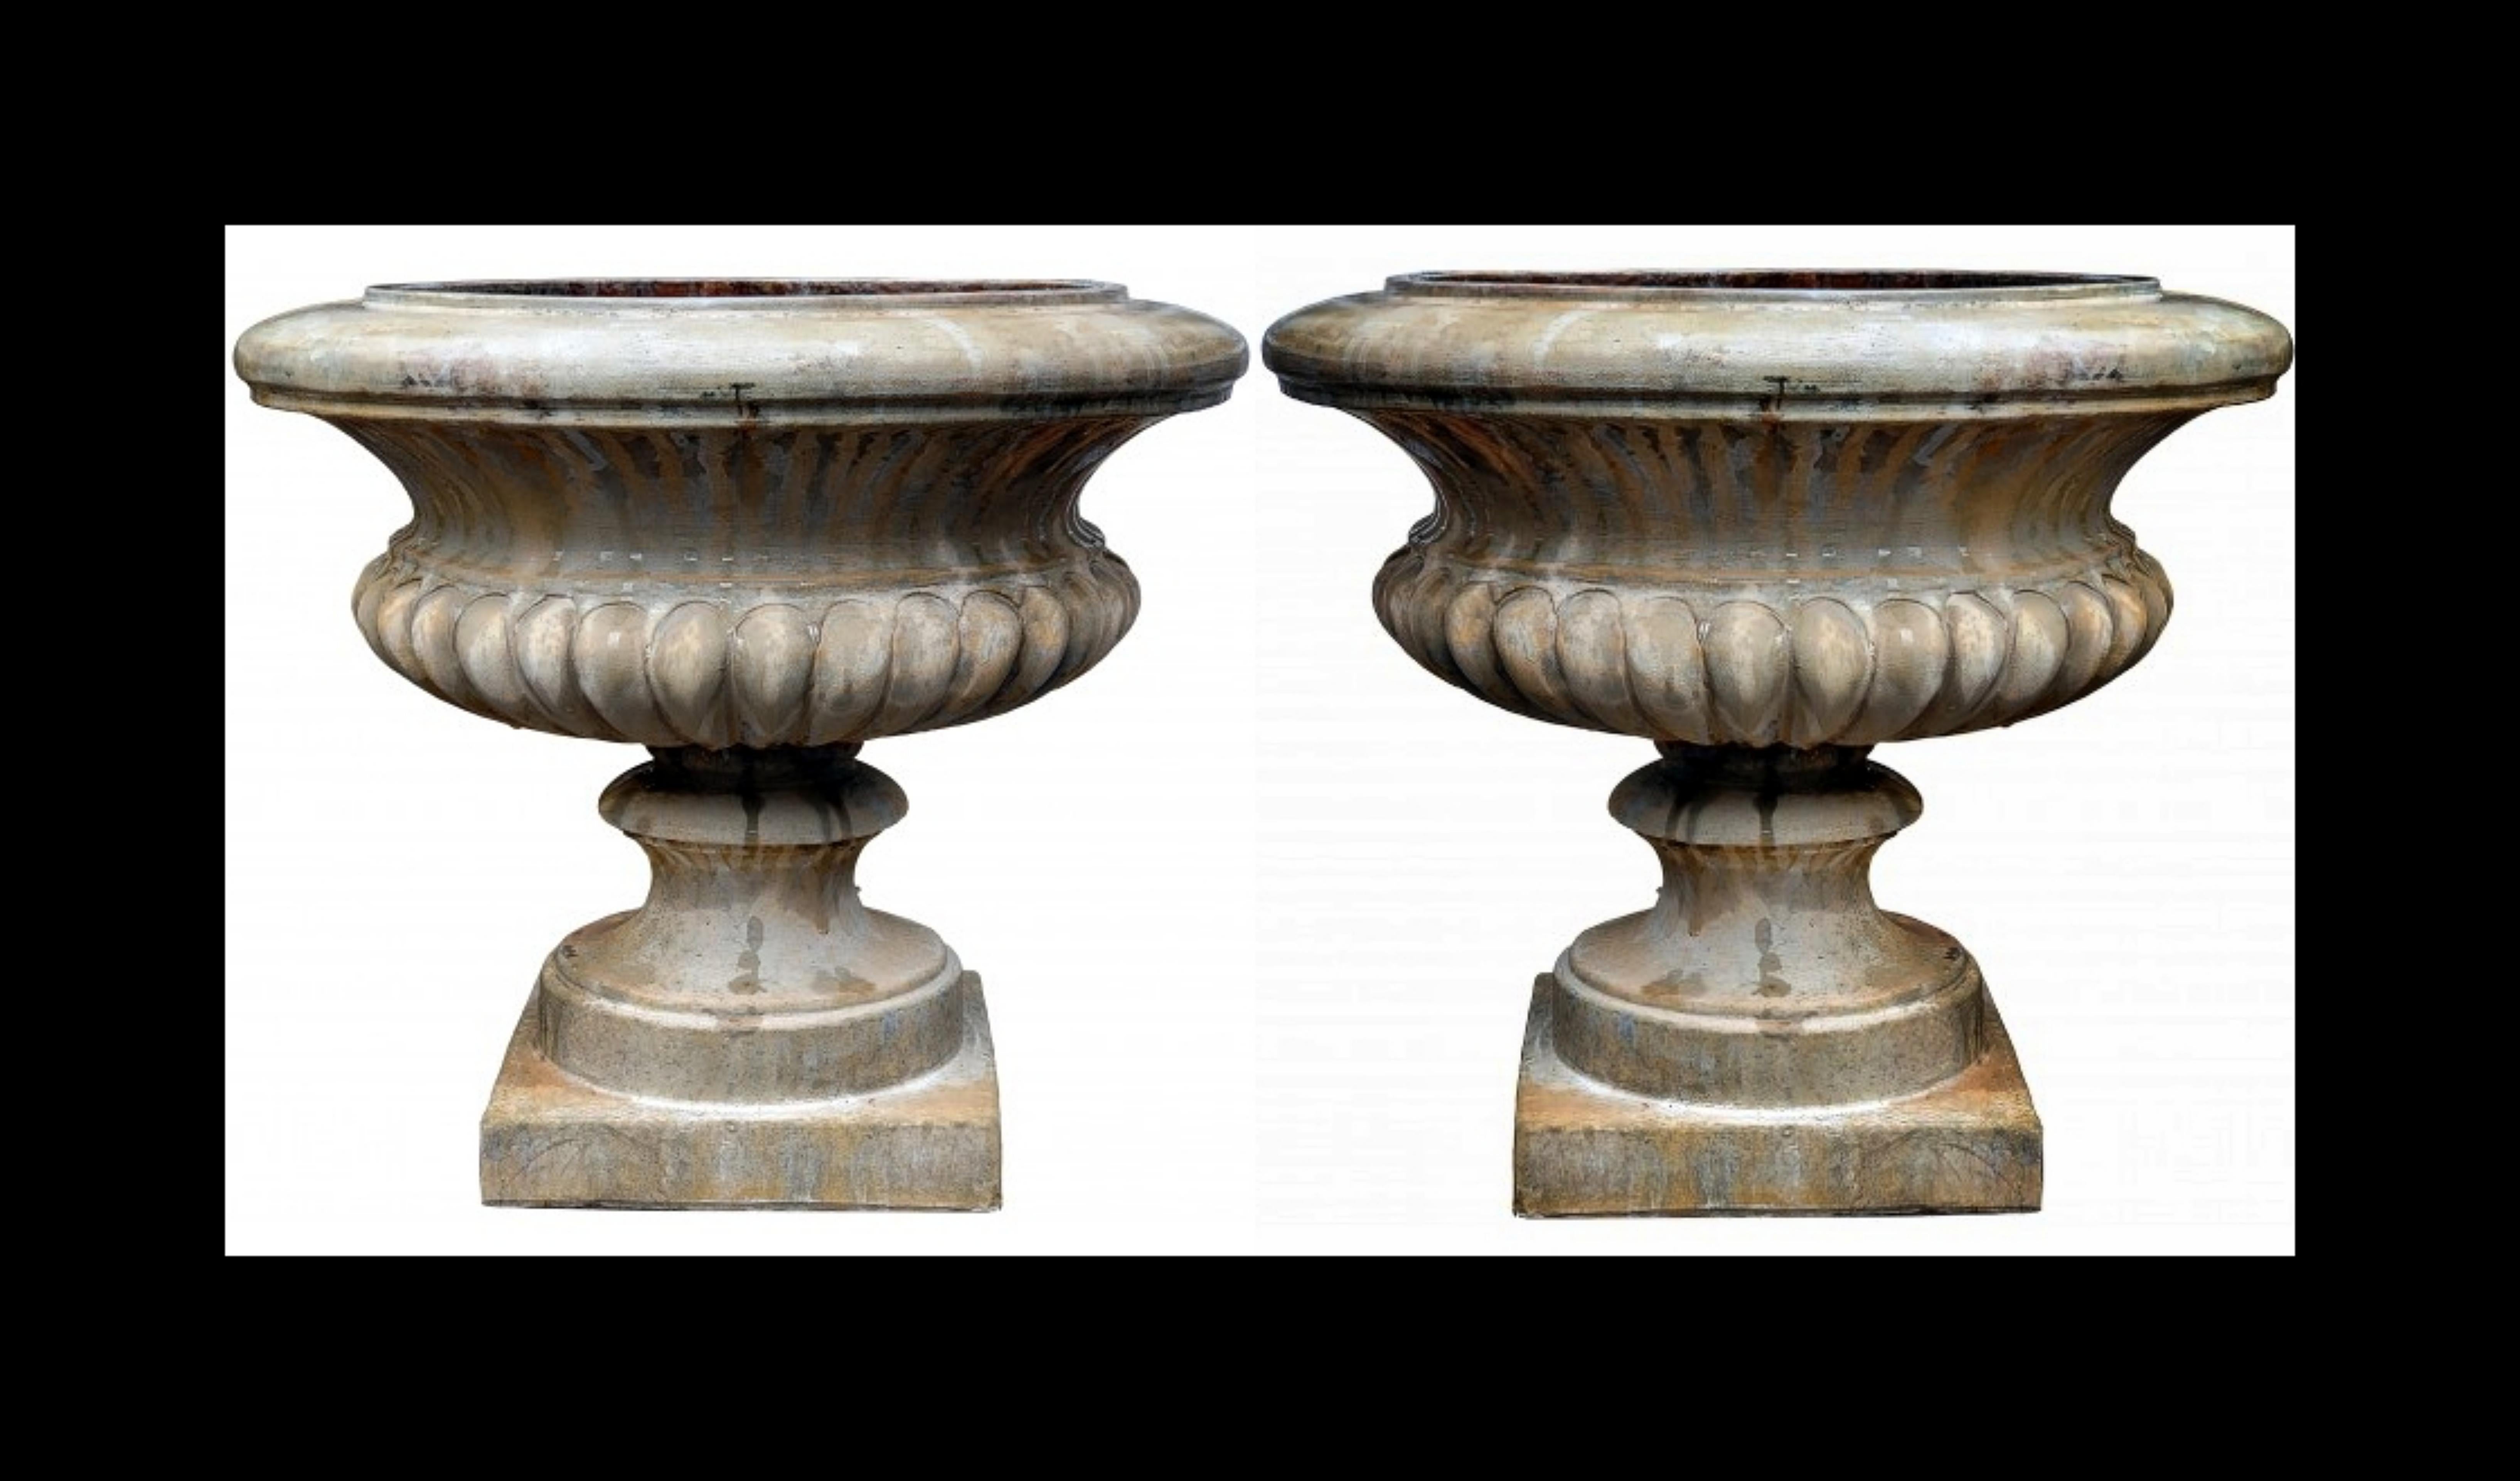 PAIR OF LARGE MEDICI TERRACOTTA GOBLETS FROM IMPRUNETA BACCELLATO 20th Century

Handmade in Tuscany.
Typical low and wide Medici chalice.
Impruneta terracotta.

HEIGHT 48 cm
DIAMETER 54 cm
WEIGHT 15 Kg
SQUARE BASE - SIDE X SIDE 28 X 28 cm
MATERIAL